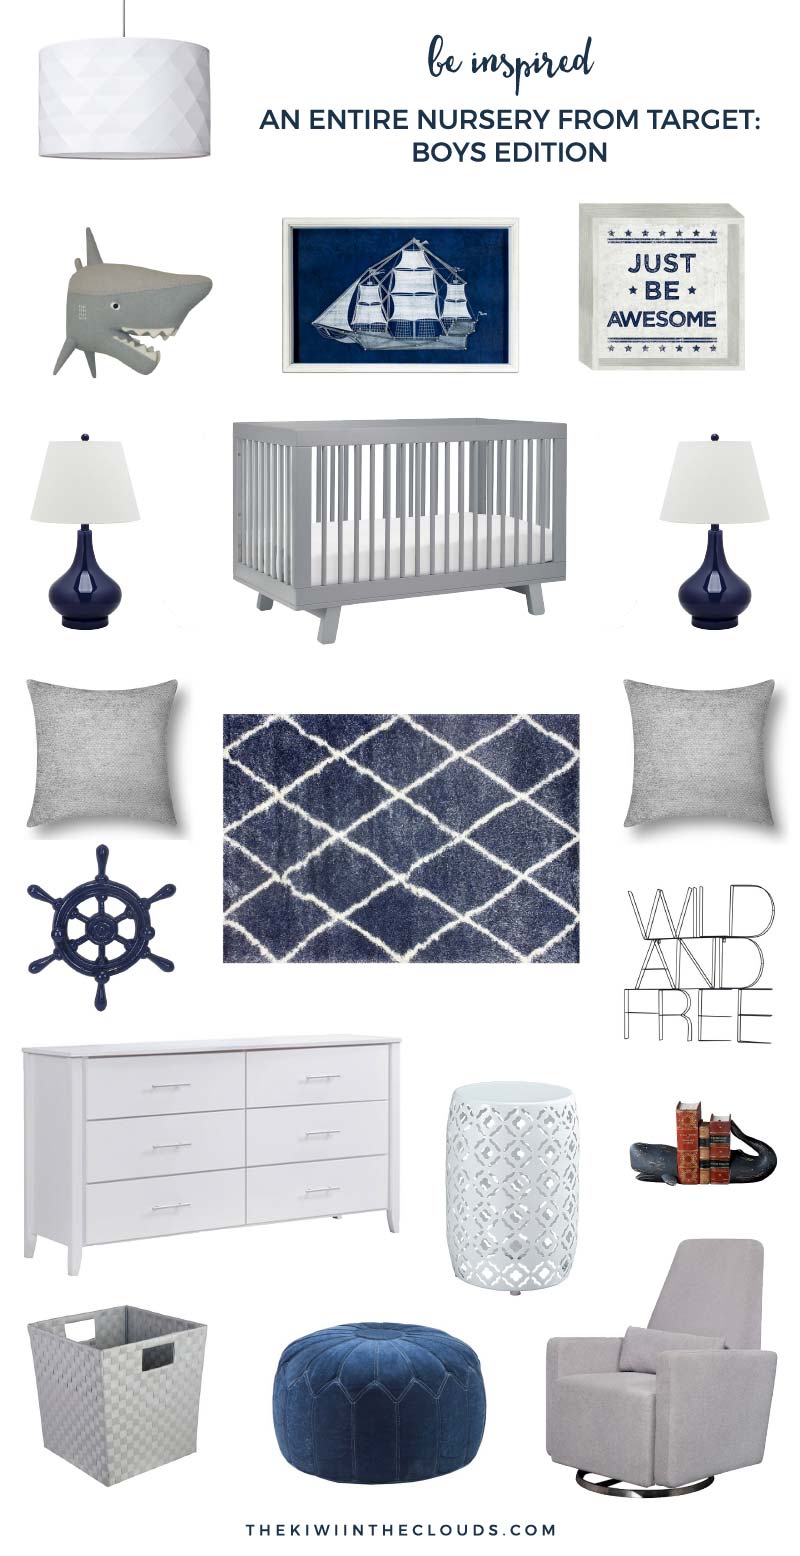 All Target Nursery For Boys | I get it; you're obsessed with Target. Who isn't?! That's why I designed this entire nursery from Target. Go ahead and finish your entire nursery today!